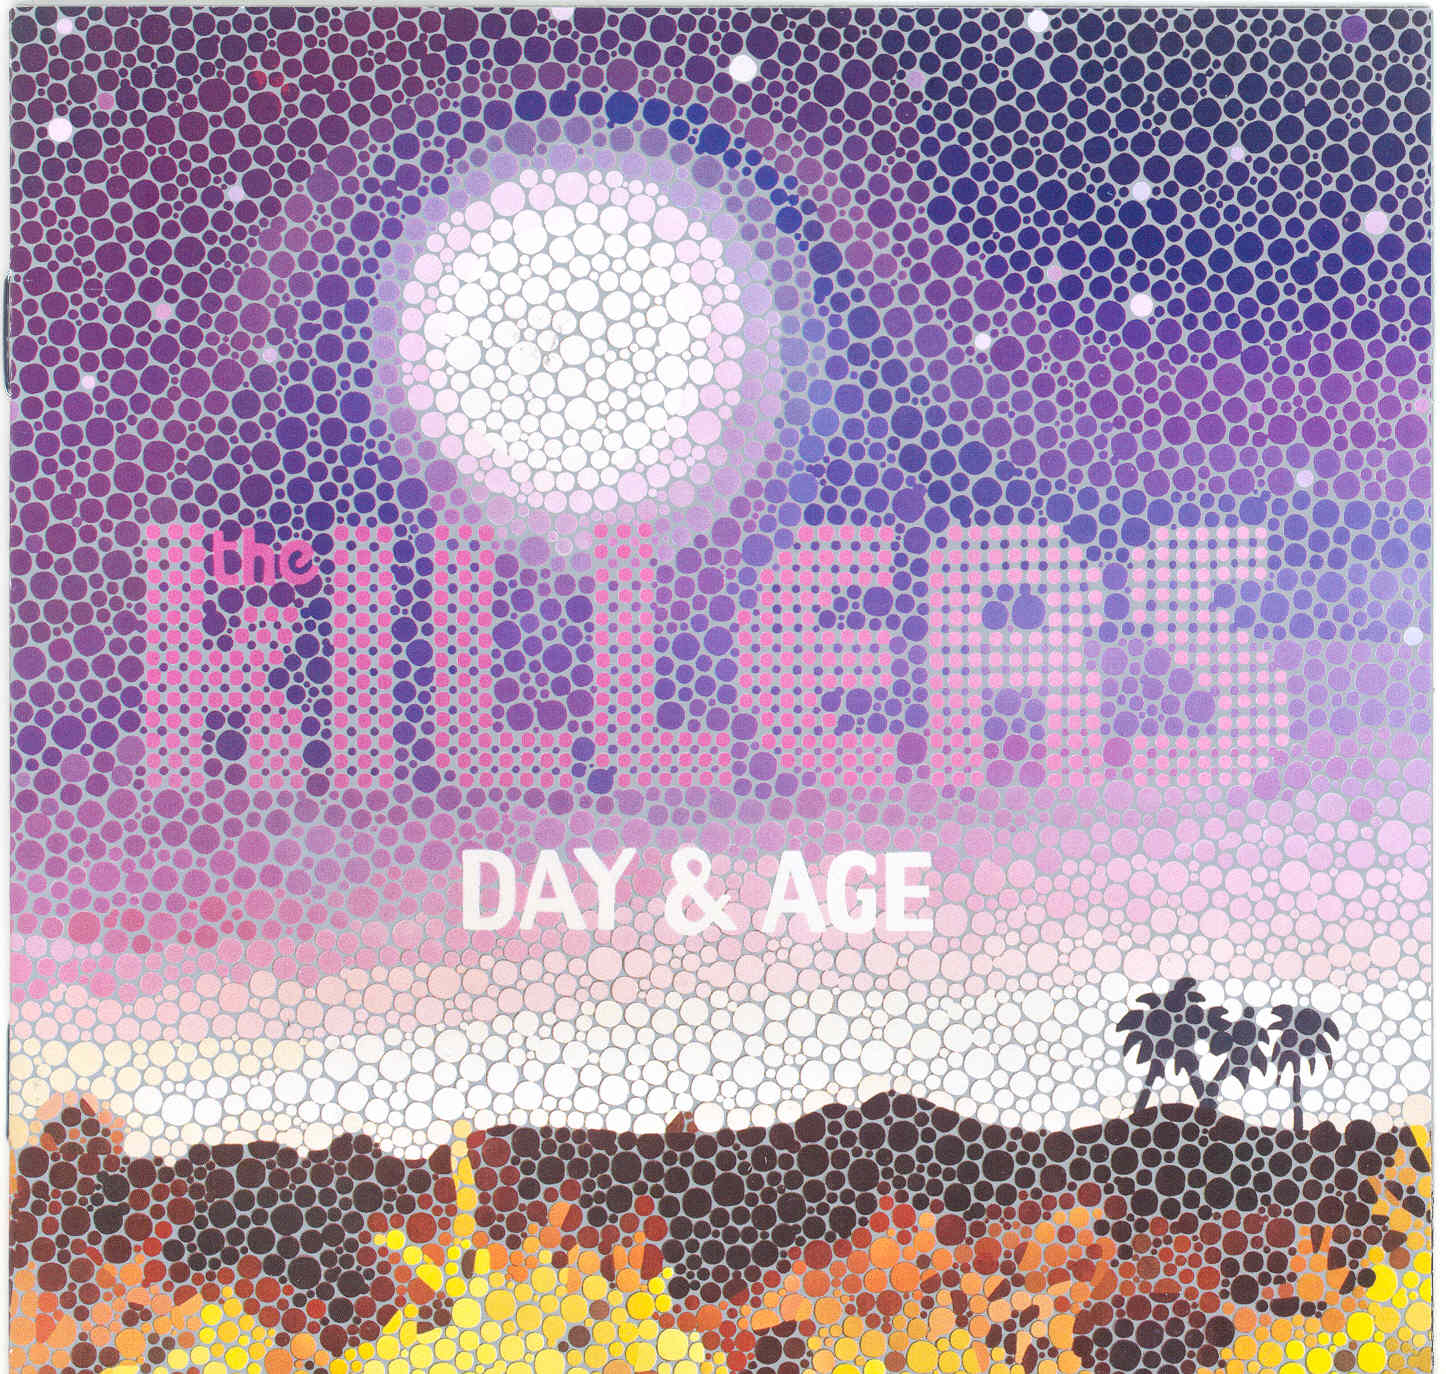 Day & age